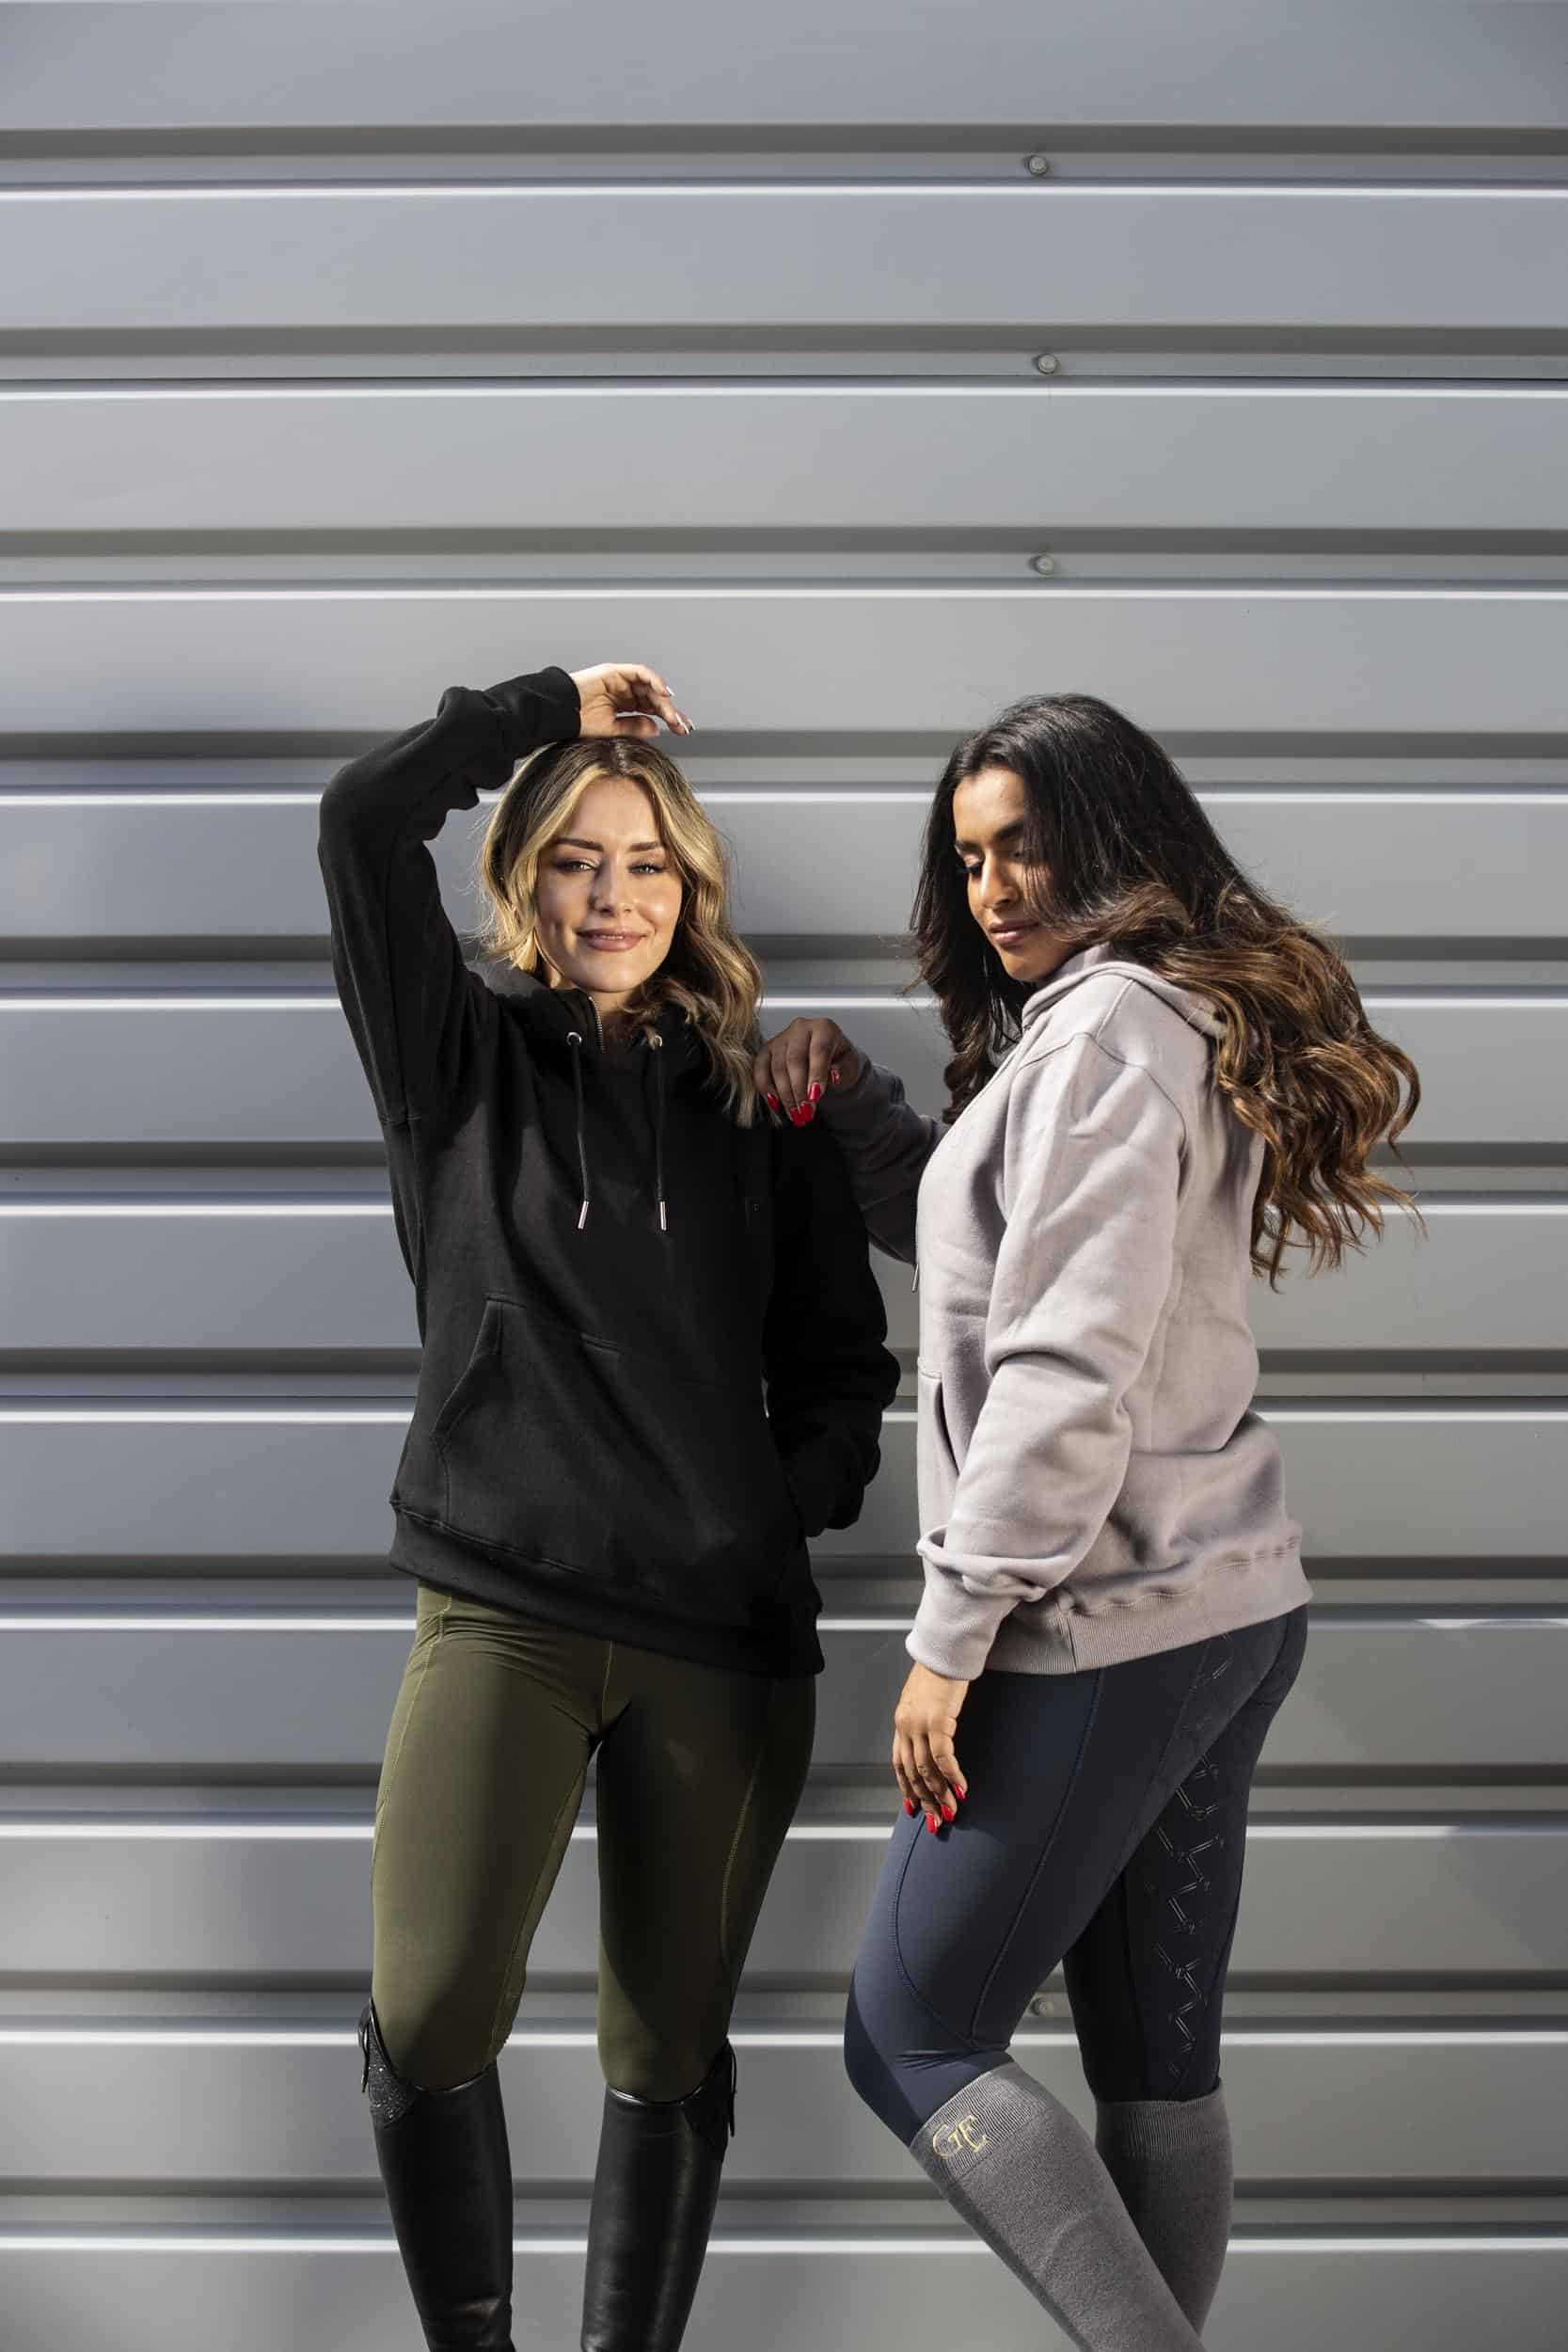 Two models standing next to each other. The model on the left is wearing our black hoodie and khaki riding shorts. The model on the right is wearing our taupe grey hoodie and navy riding leggings.